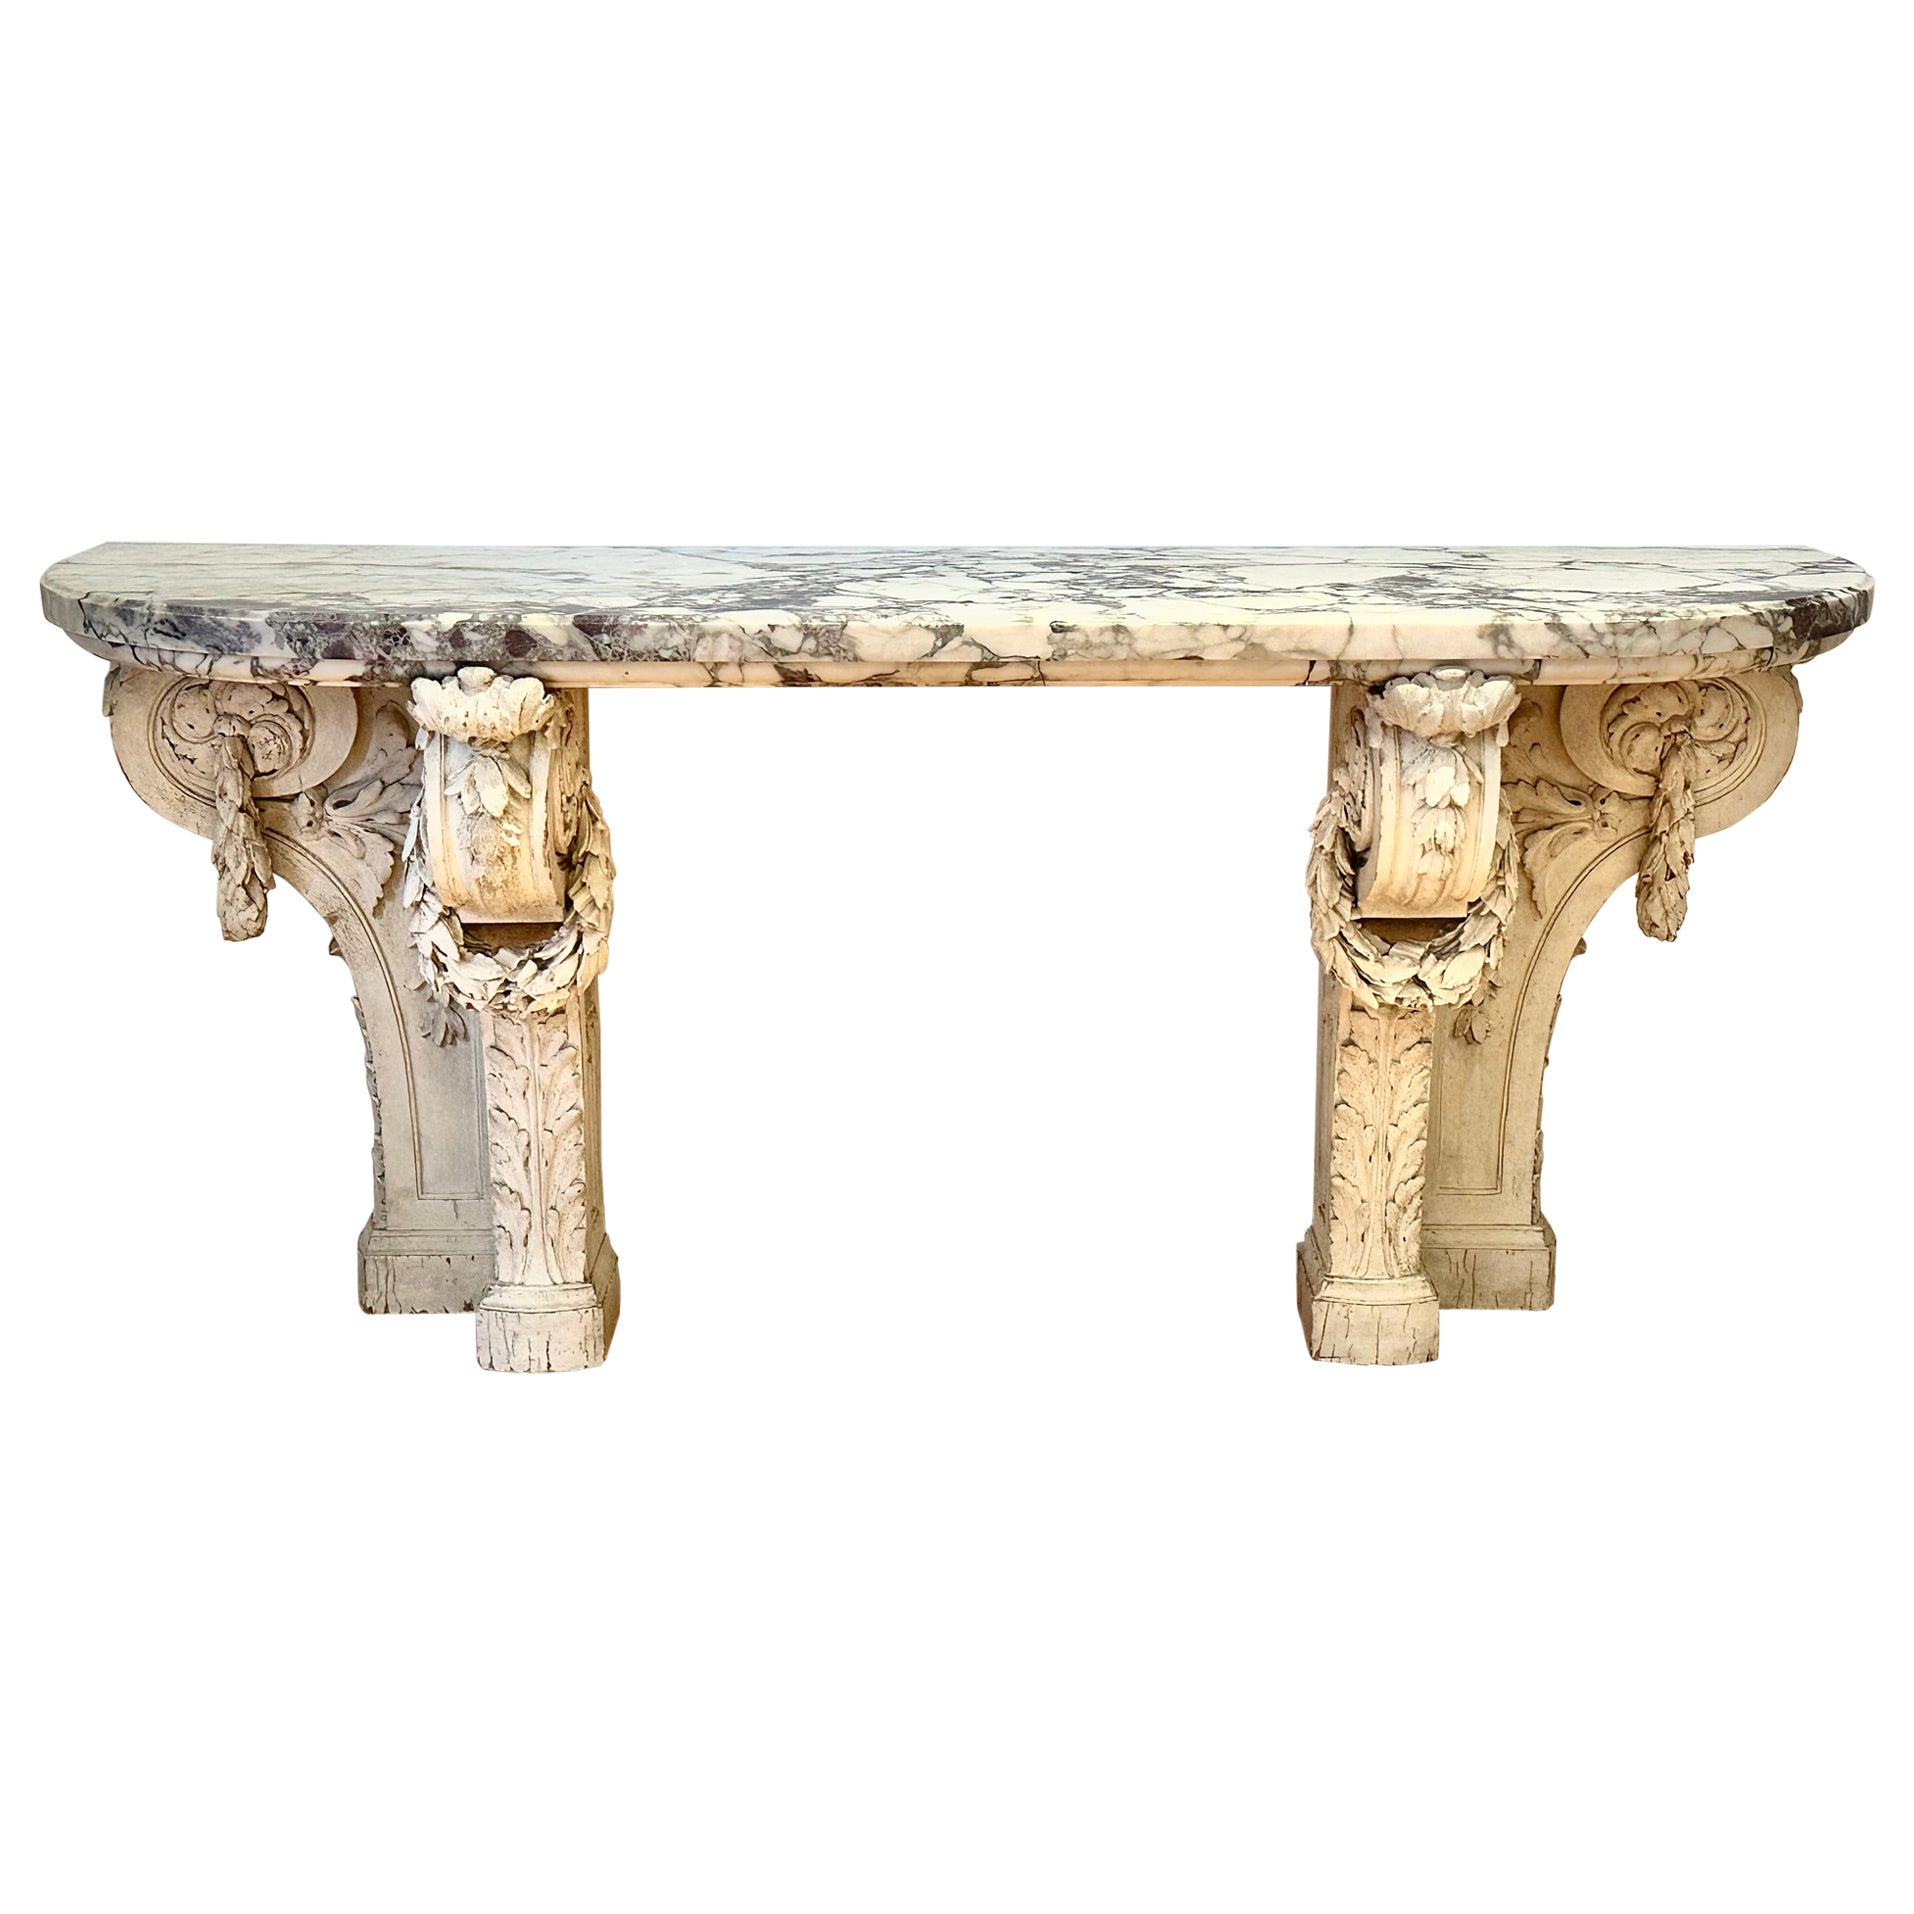 19th Century Neoclassical Marble and Carved Wood Console Table